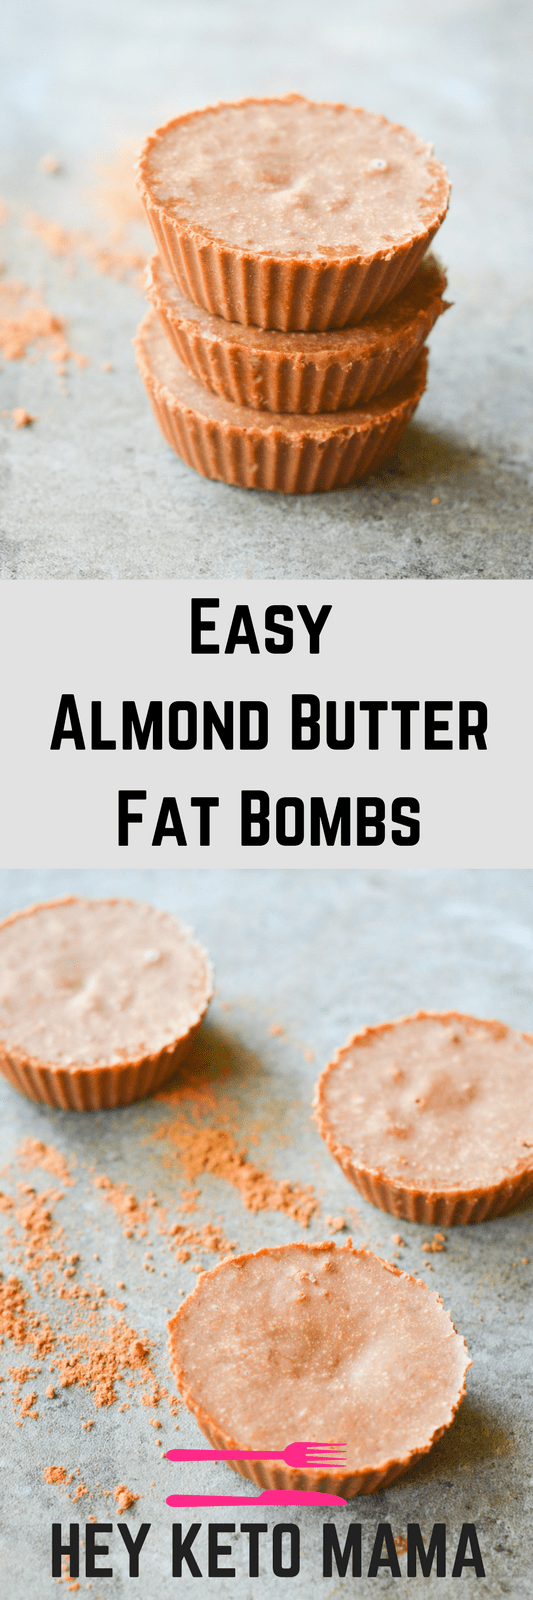 These Almond Butter Fat Bombs are very easy to make AND they're lick-the-bowl-delicious! With only 4 ingredients and less than 2 net carbs, you HAVE to try them the next time you need a sweet fix. | heyketomama.com